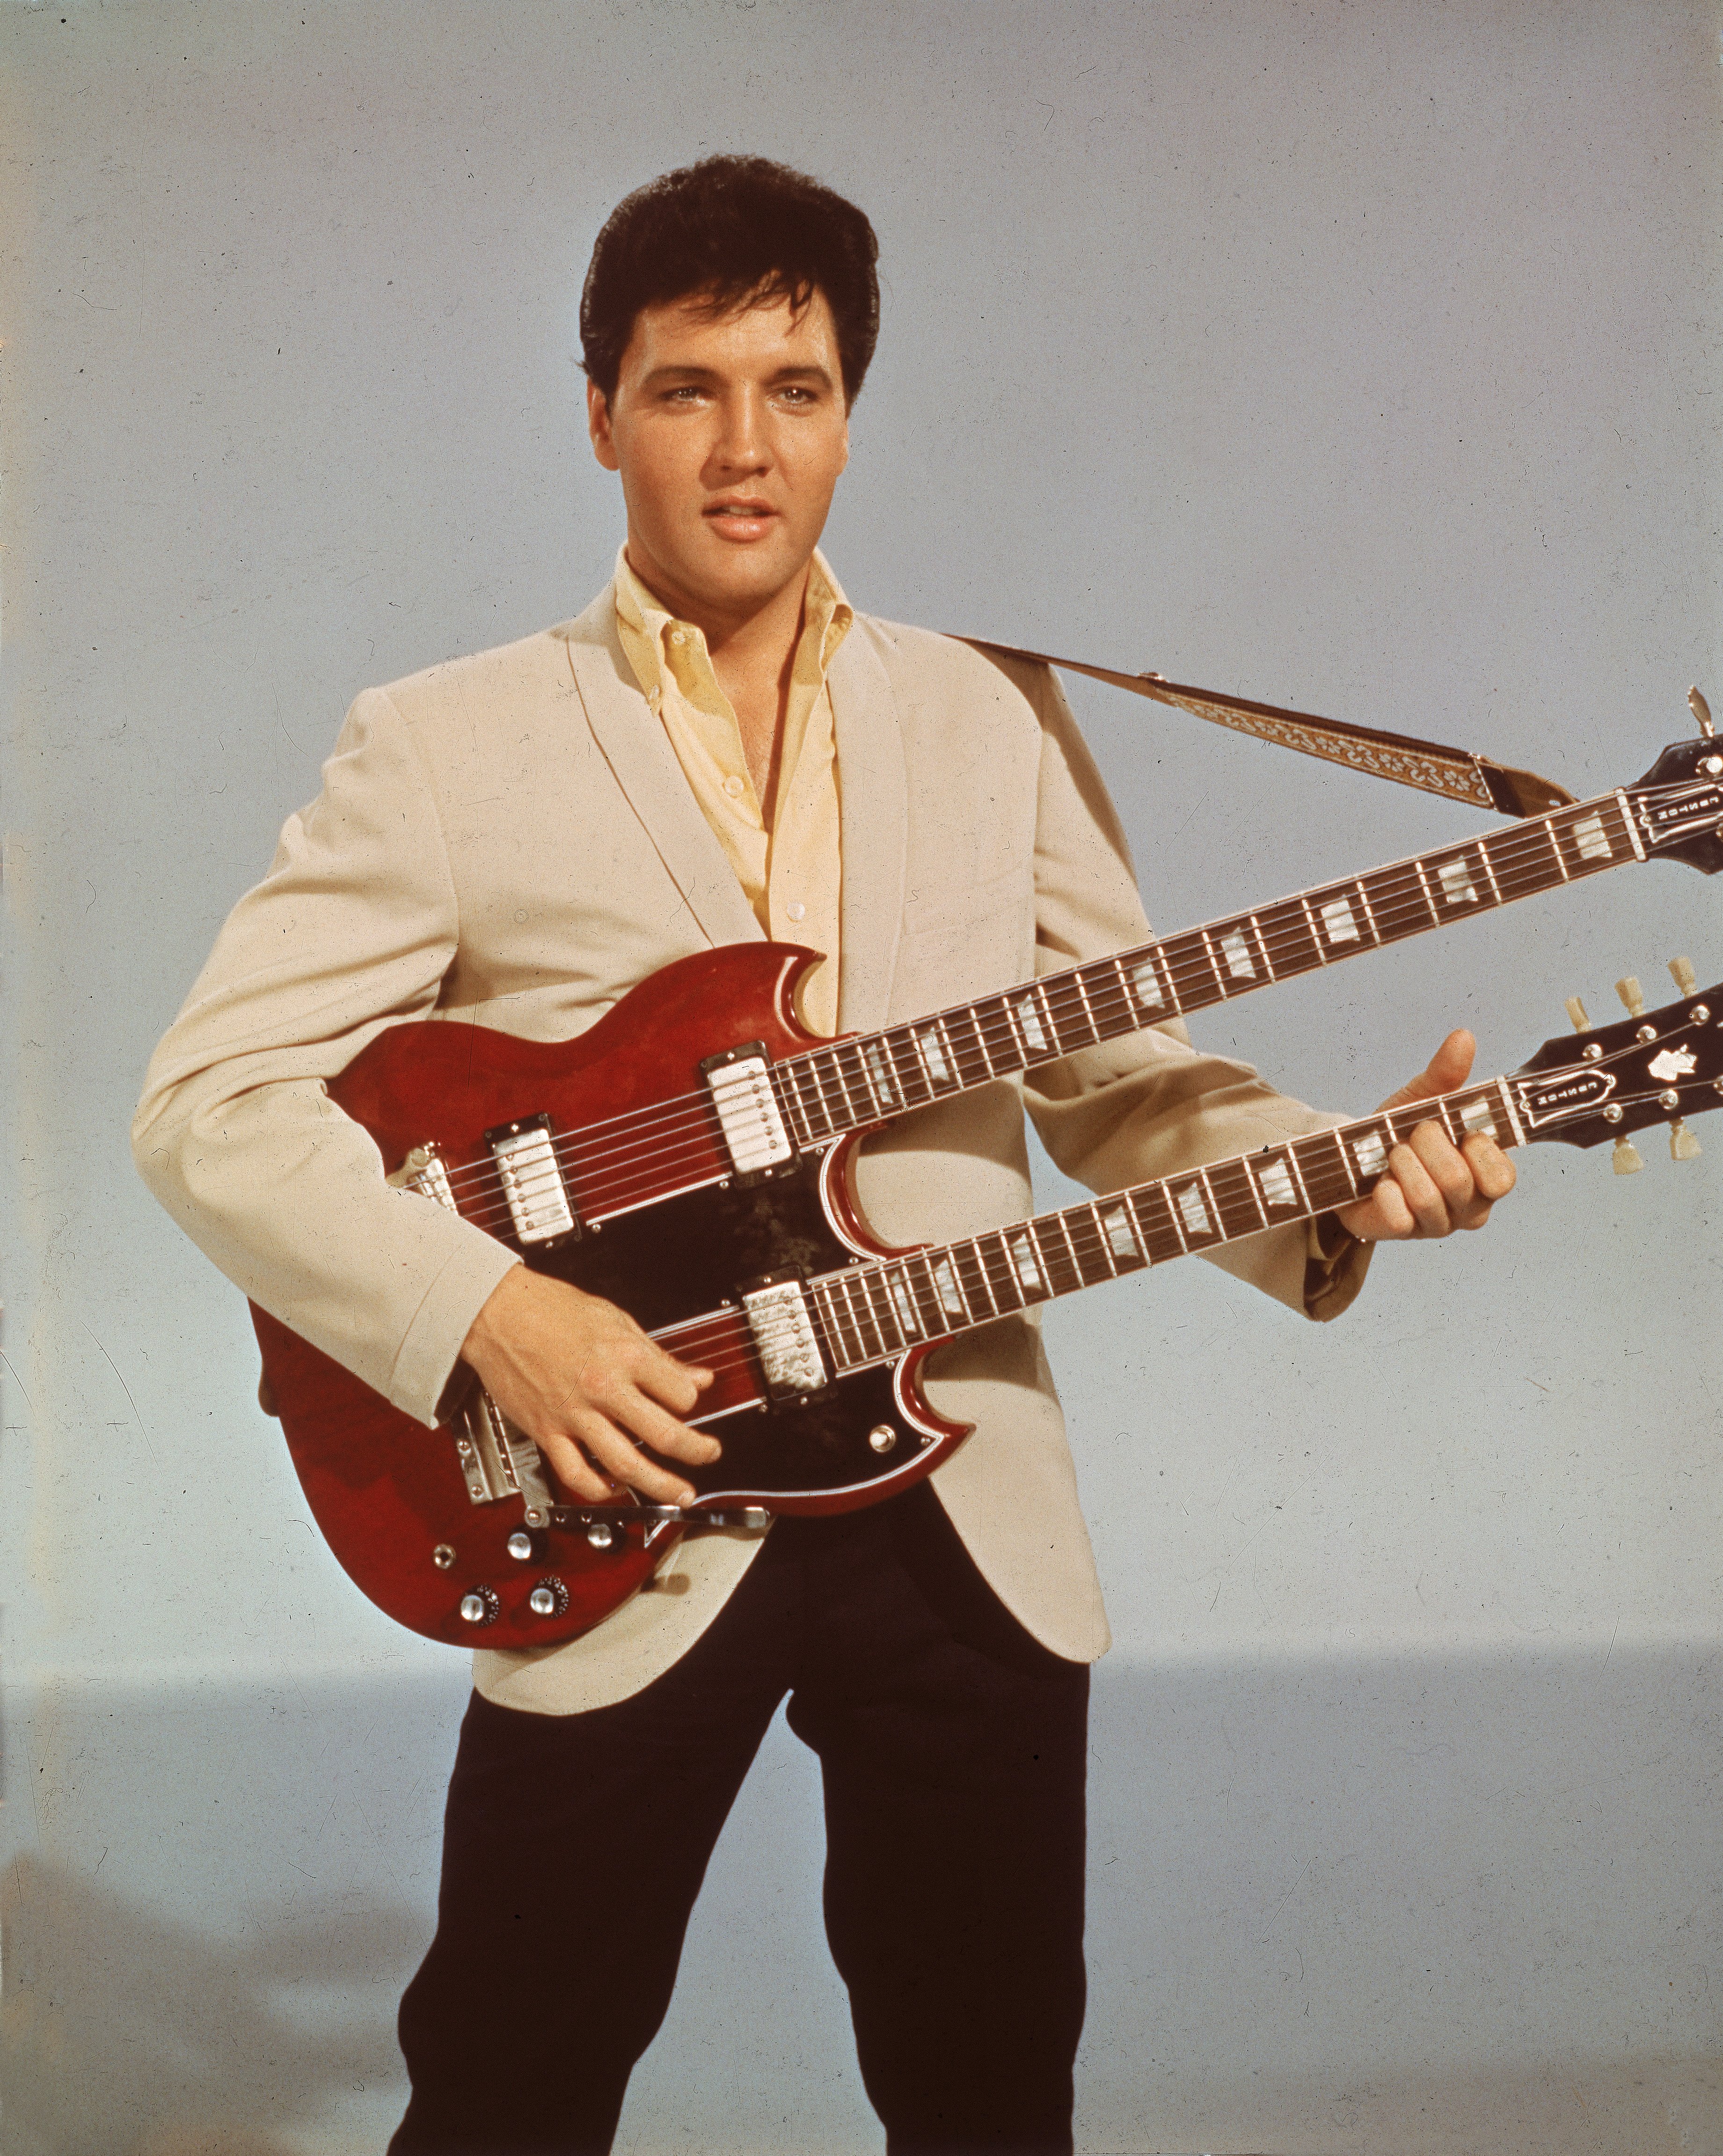 At 36, legendary musician Elvis Presley received a Grammy Lifetime Achievement Award in 1971. Photo: Getty Images